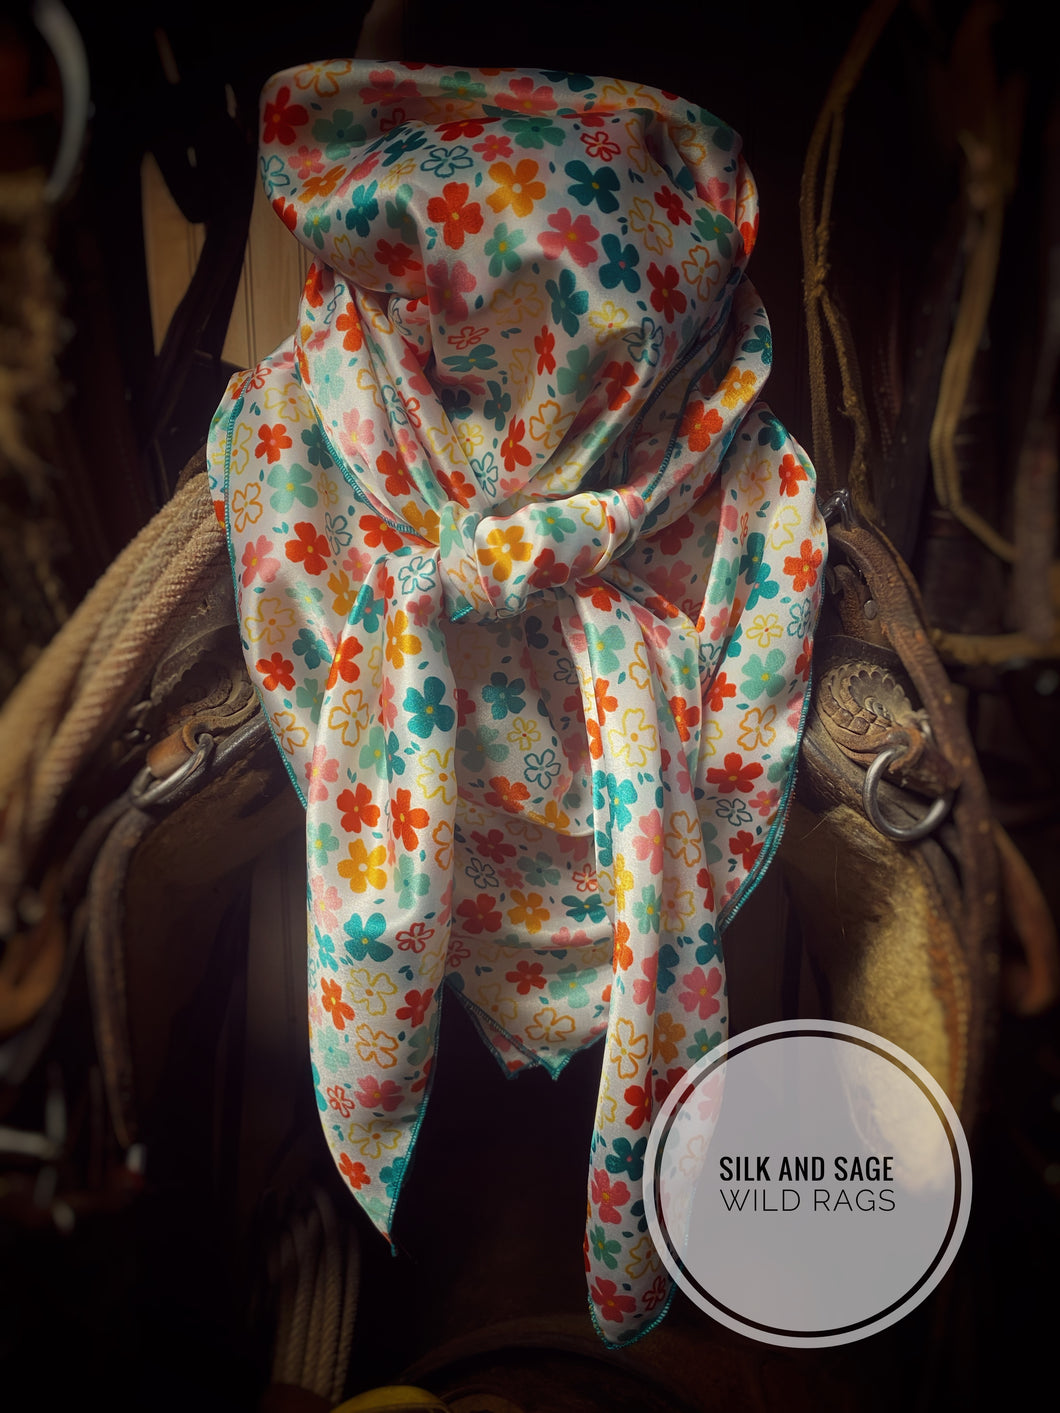 Super fun pink, red, teal, turquoise, mustard, orange floral with a white back ground. Super silky charmeuse fabric